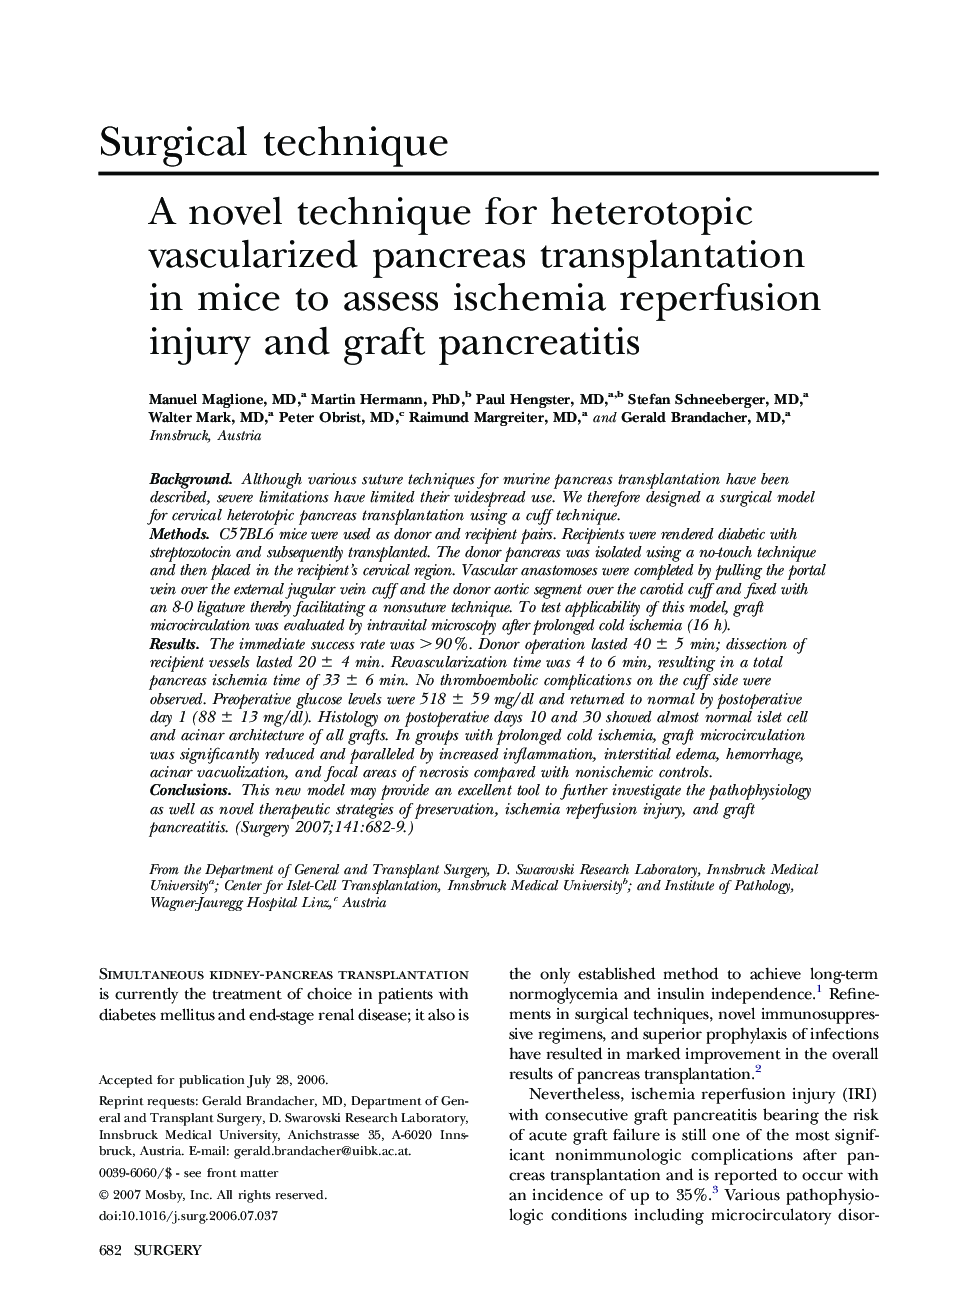 A novel technique for heterotopic vascularized pancreas transplantation in mice to assess ischemia reperfusion injury and graft pancreatitis